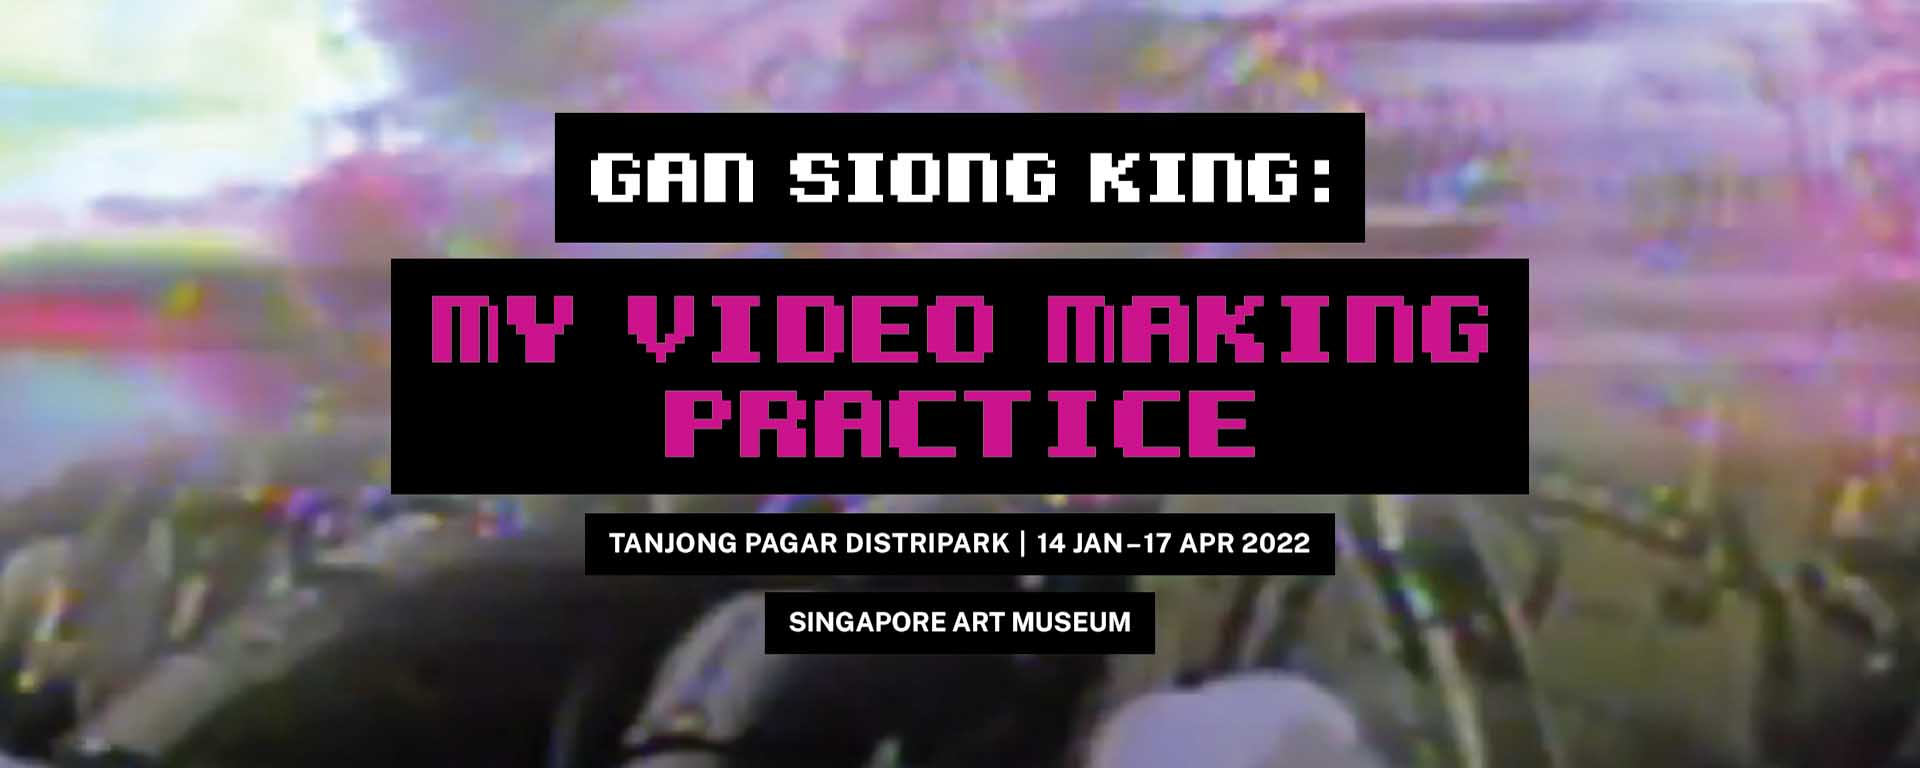 Gan Siong King: My Video Making Practice